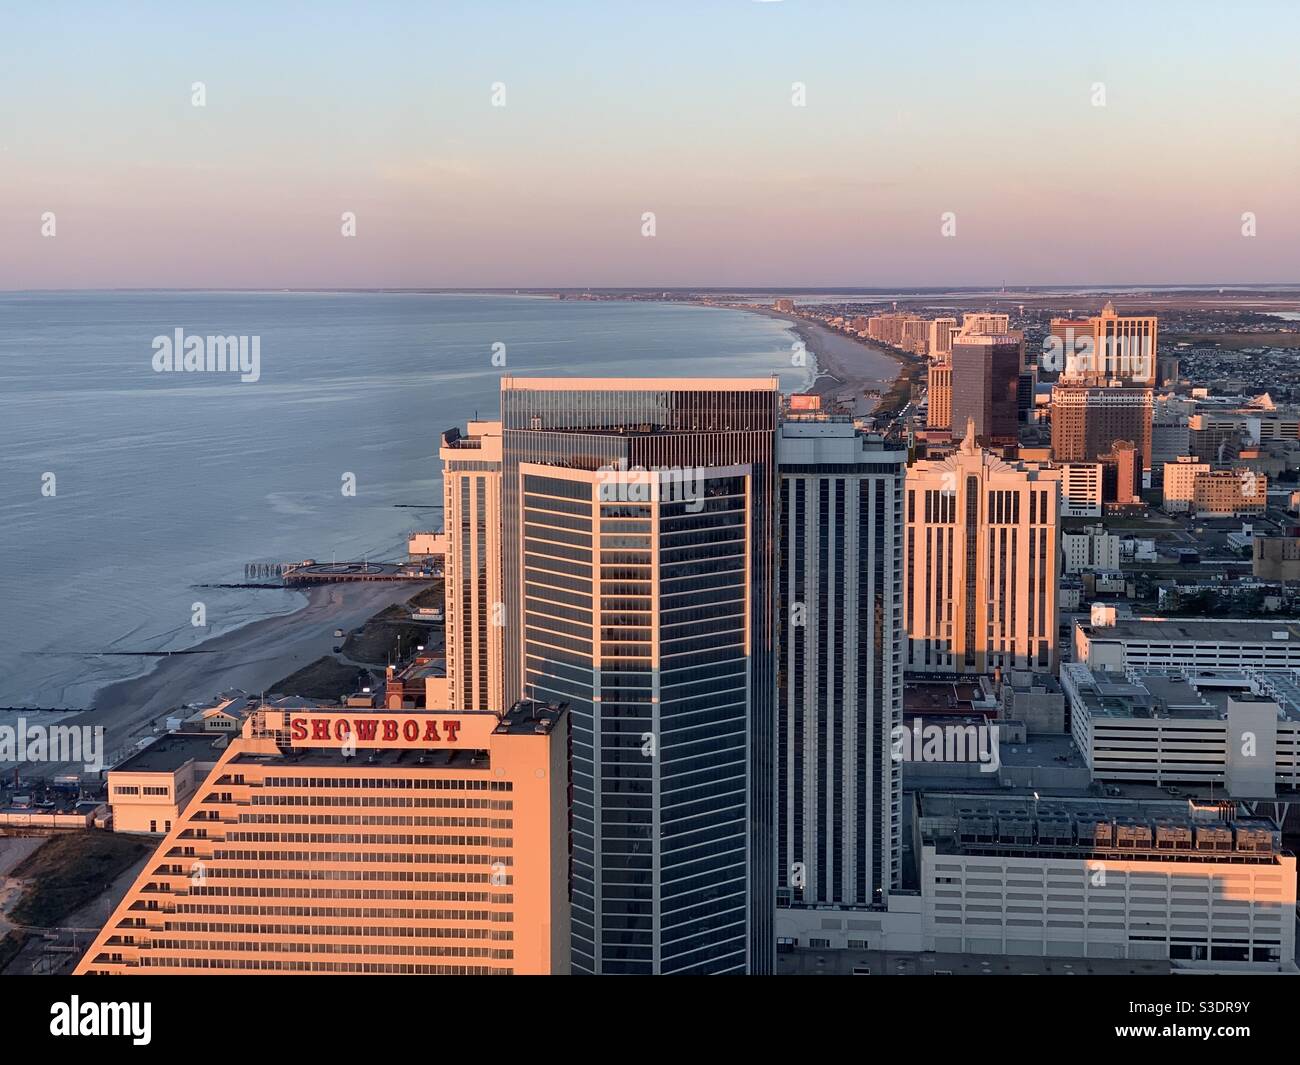 October, 2020, Early morning view of buildings along the Atlantic City Boardwalk, Atlantic City, New Jersey, United States Stock Photo